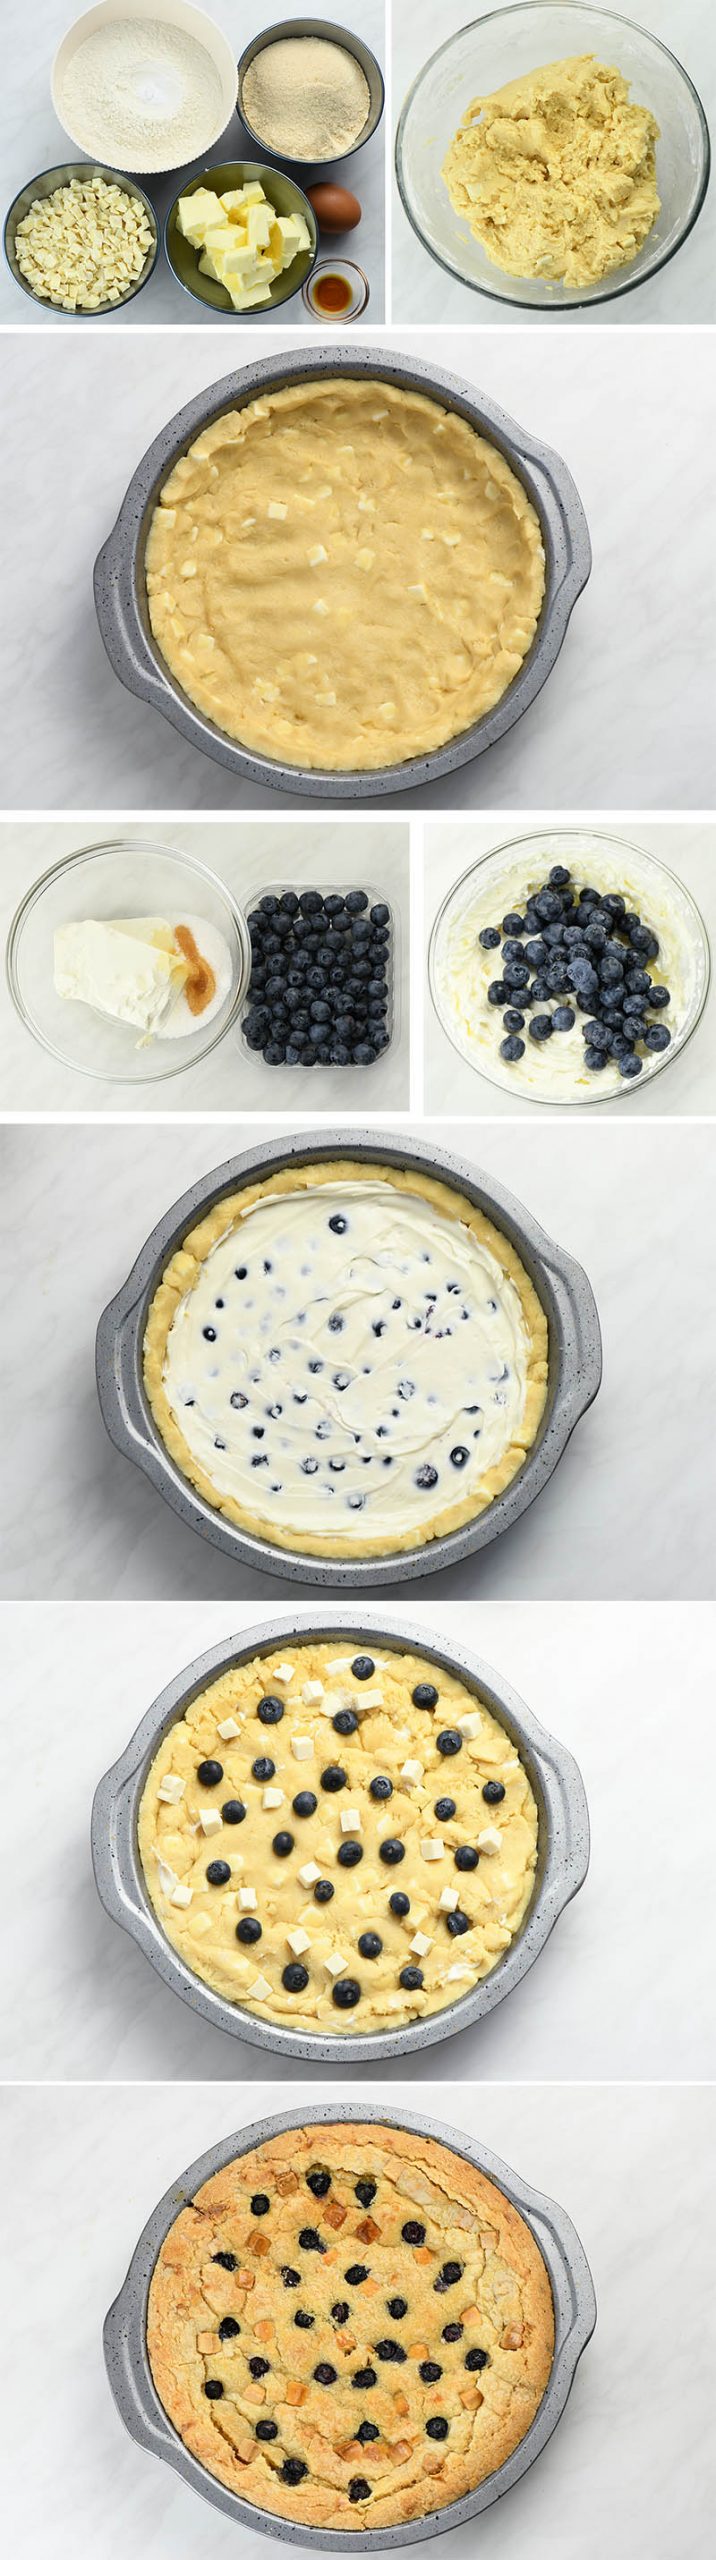 Blueberry Cheesecake Cookie Pie instructions.